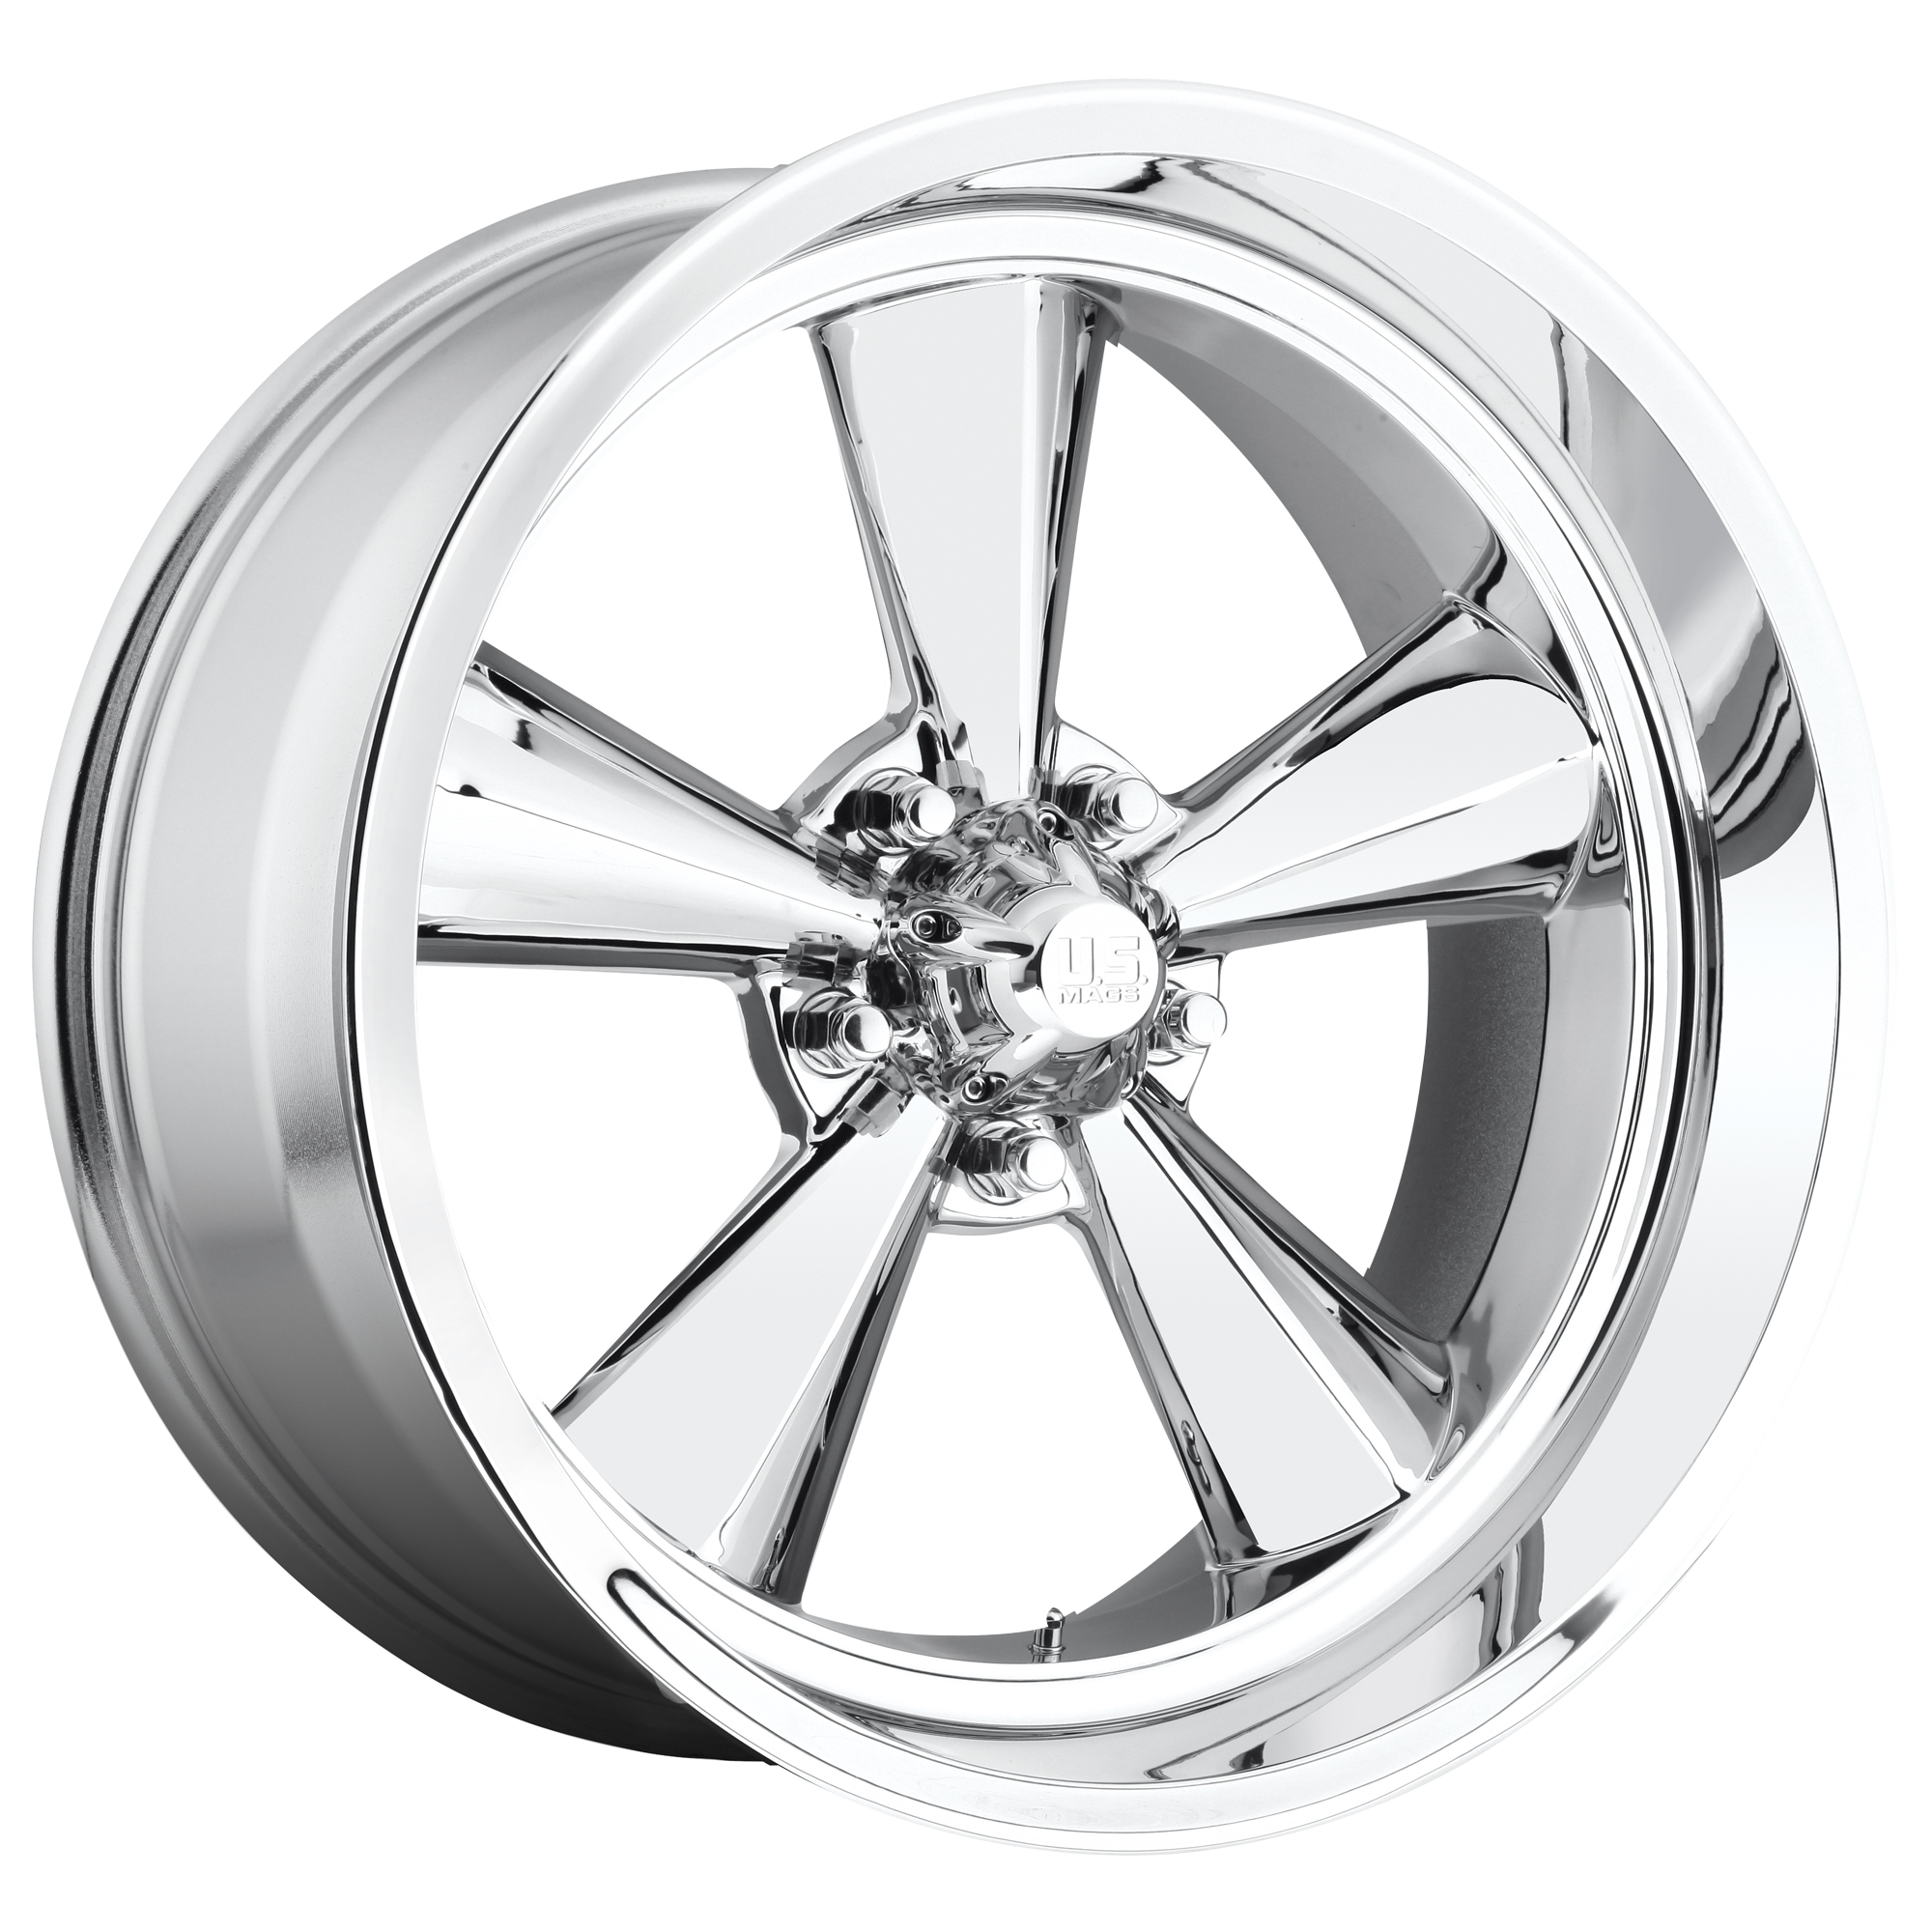 STANDARD 17x7 5x114.30 CHROME PLATED (1 mm) - Tires and Engine Performance